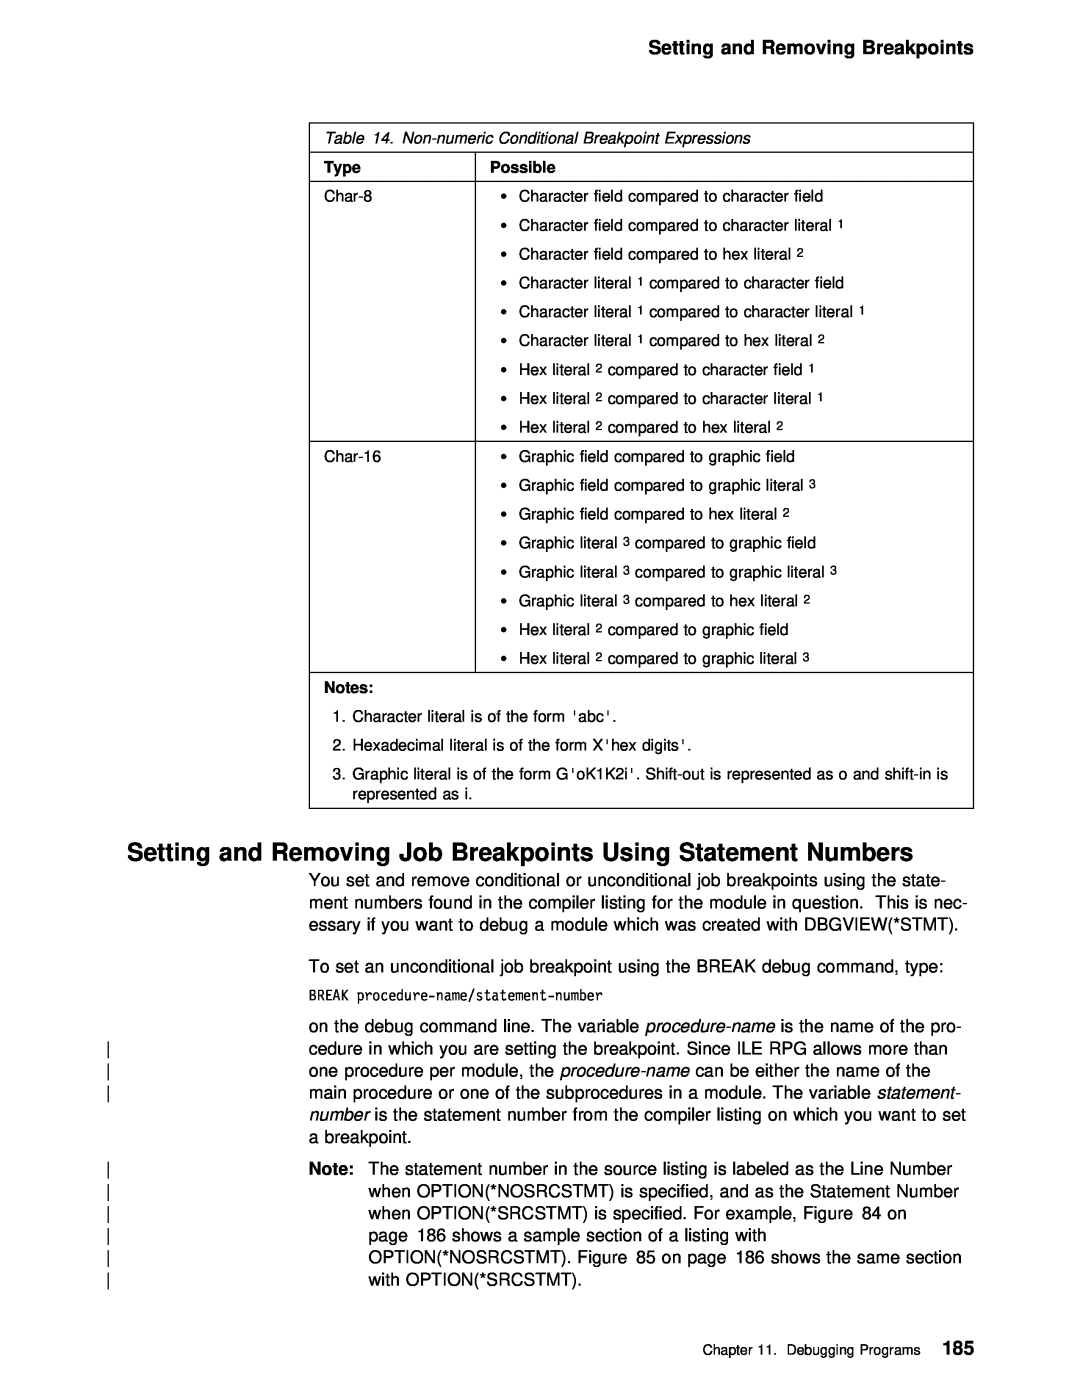 IBM AS/400 manual Setting and Removing Job, Using, Statement 